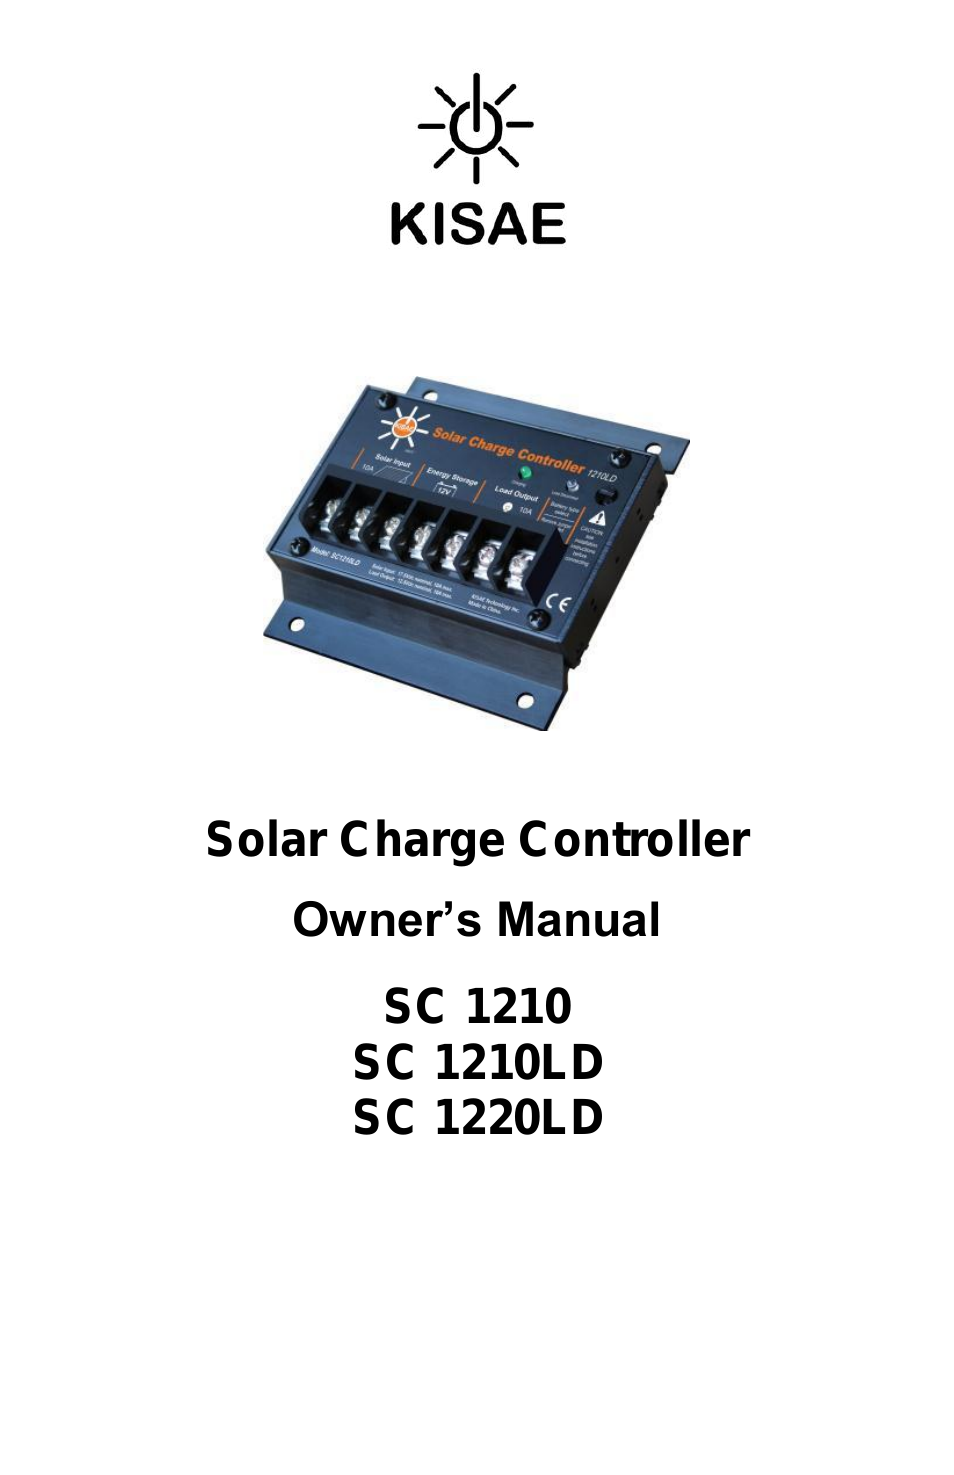 20A Solar Charge Controller (SC 1220 LD)